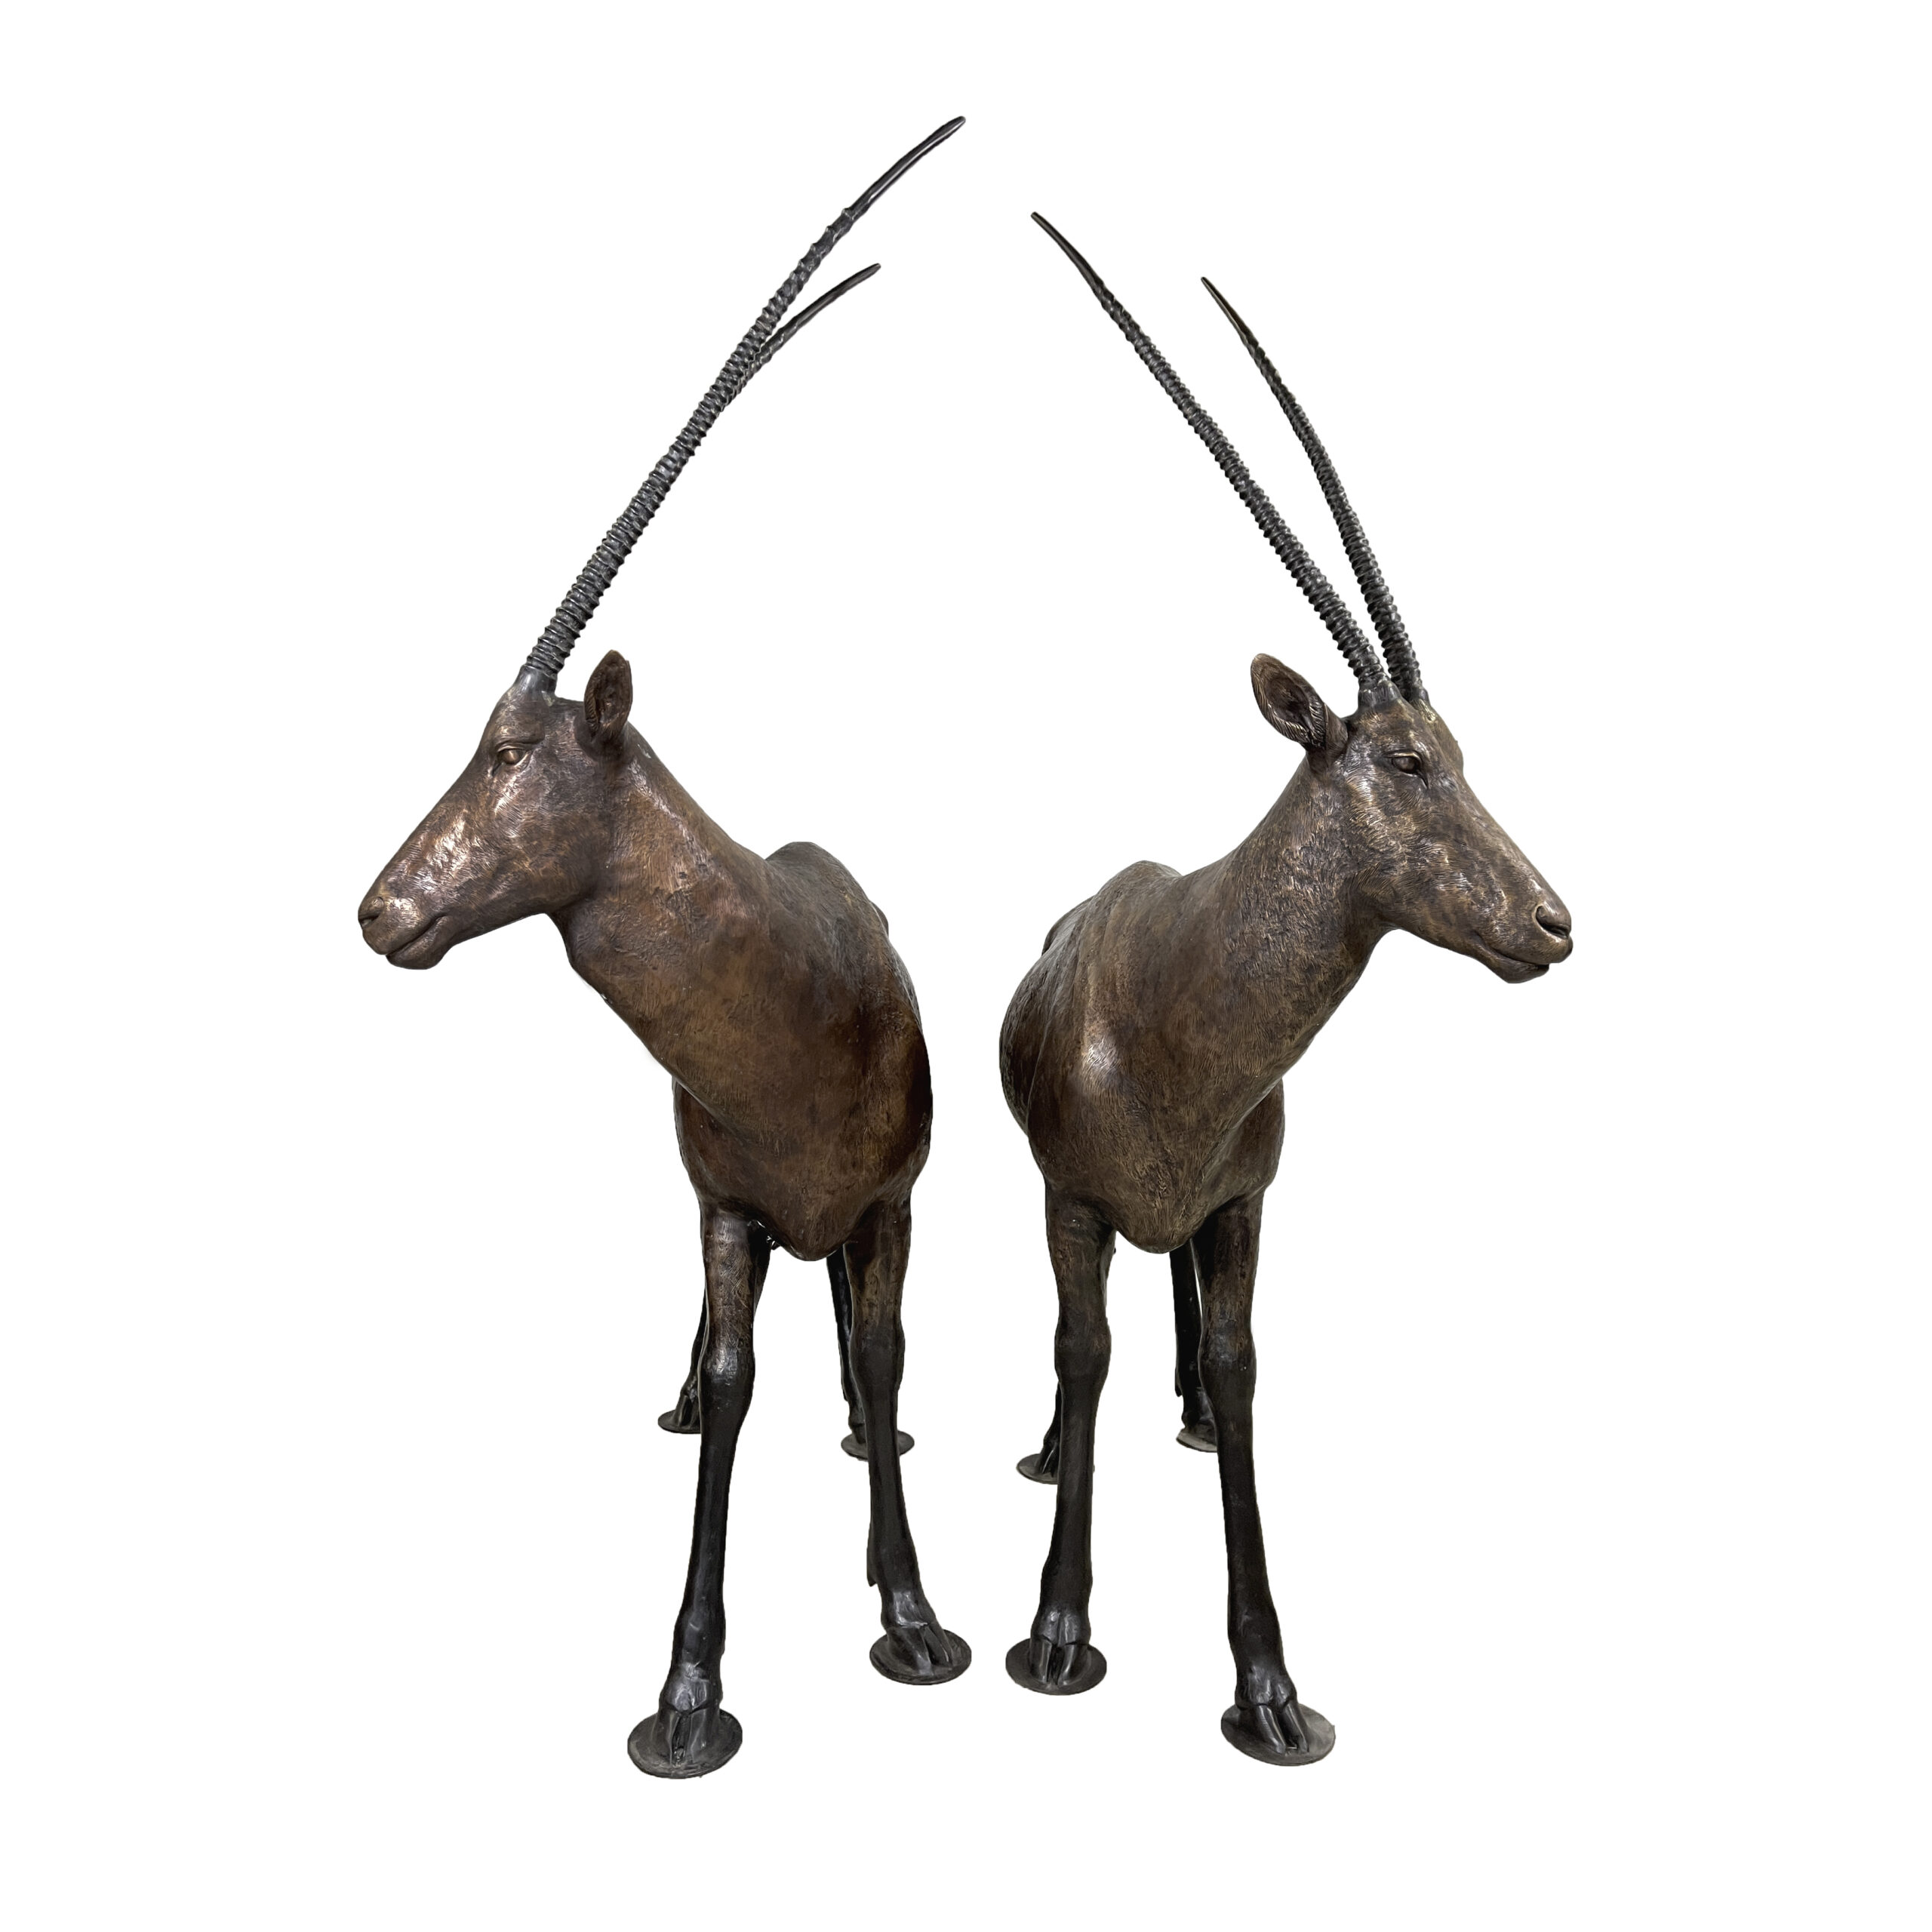 SRB10127 Bronze Arabian Oryx Sculpture Set exclusively designed and produced by Metropolitan Galleries Inc